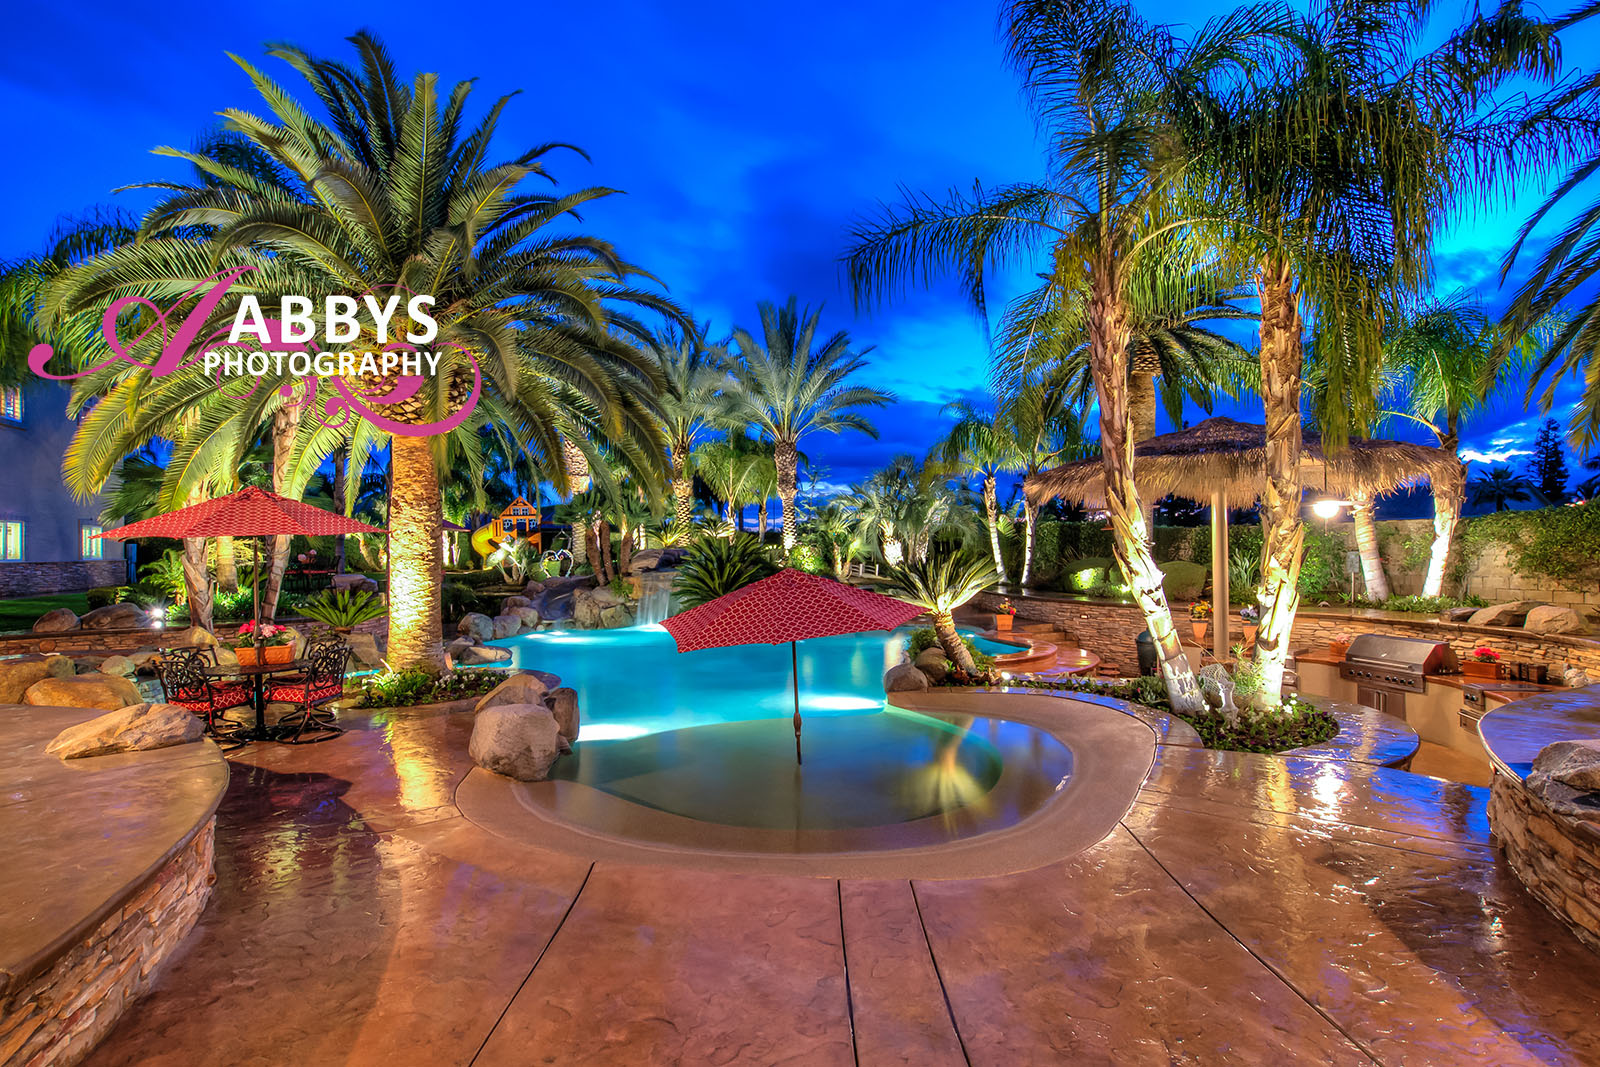  For the best in landscape photography, go with Abbys Photography in Bakersfield. For all your real estate photography needs.